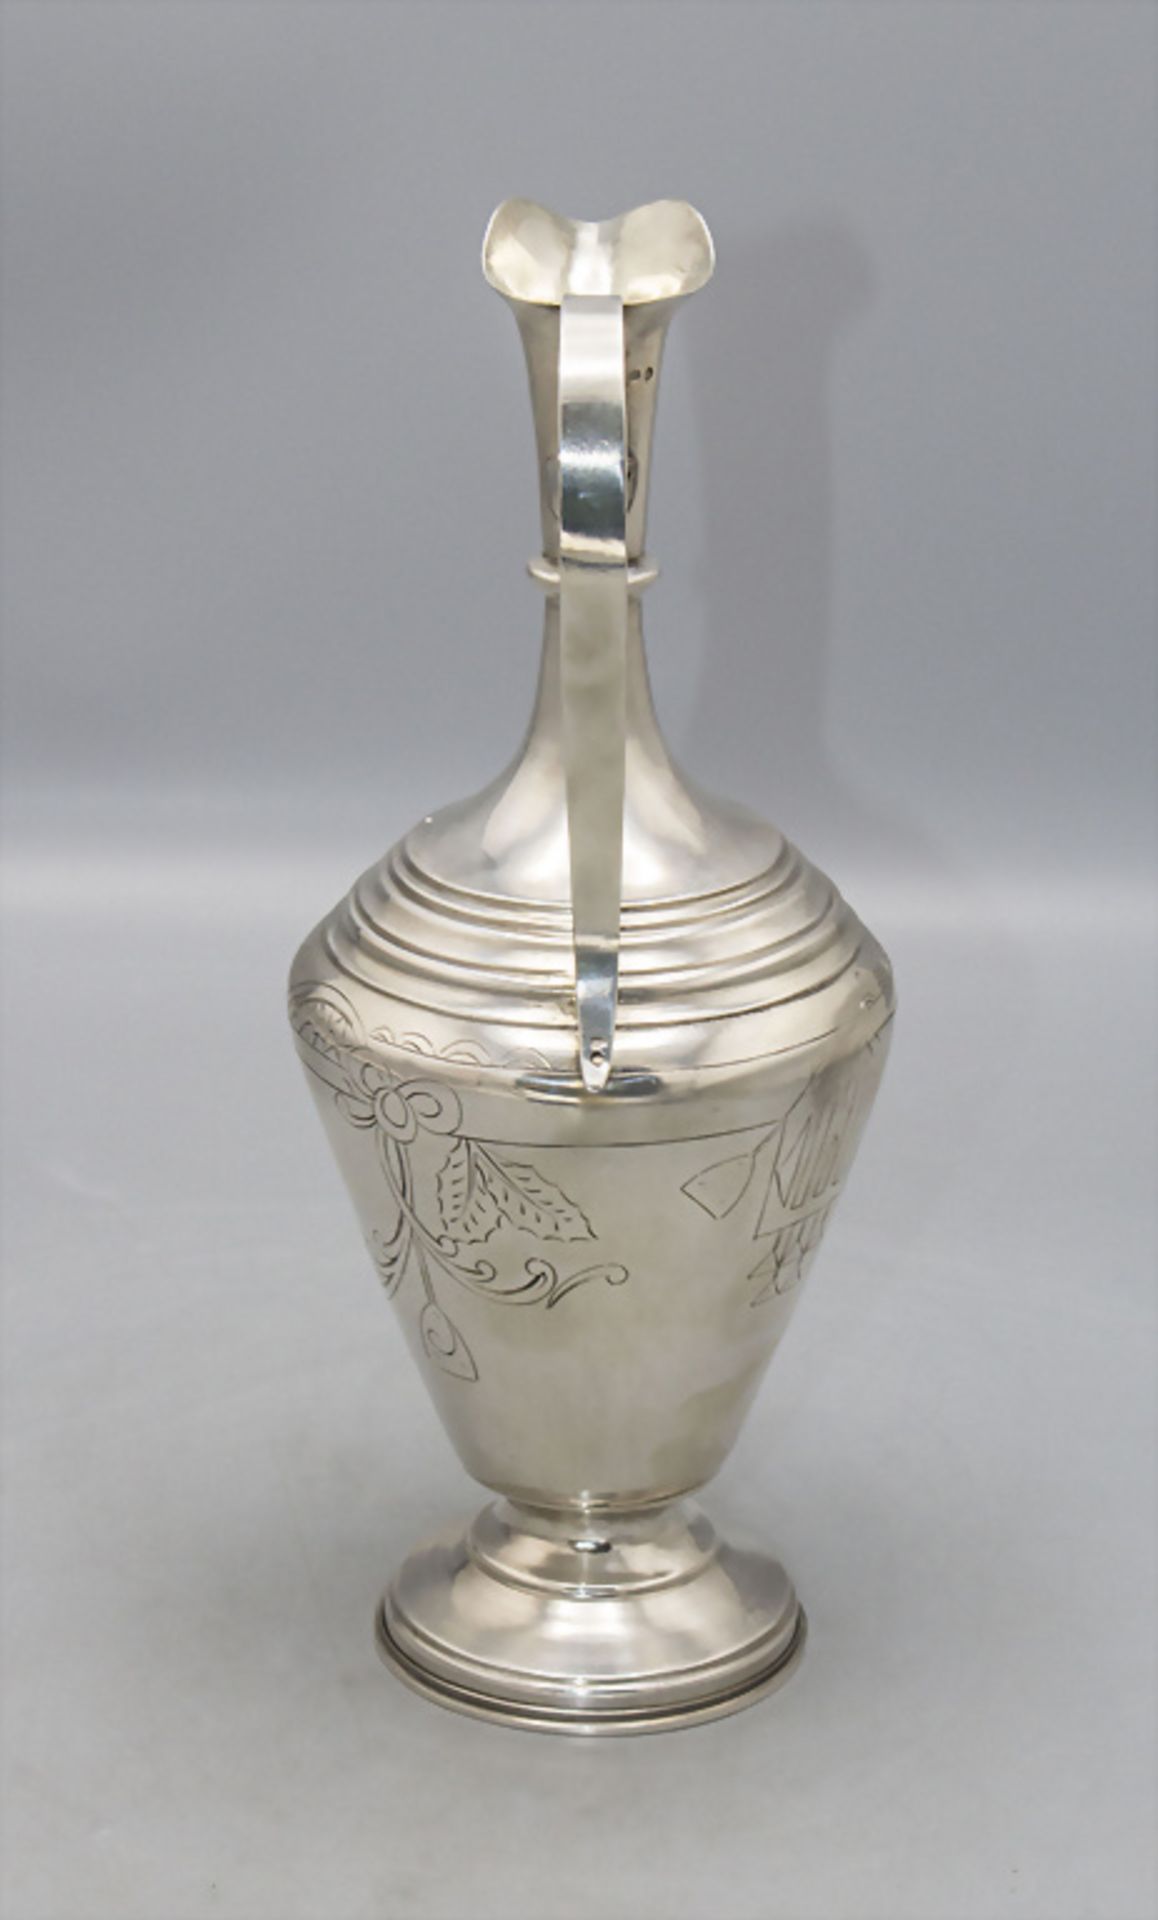 Schenkkrug / A silver jug, Vasily Sergeevich Sikachev, Moskau/Moscow, 1908-1917 - Image 4 of 6